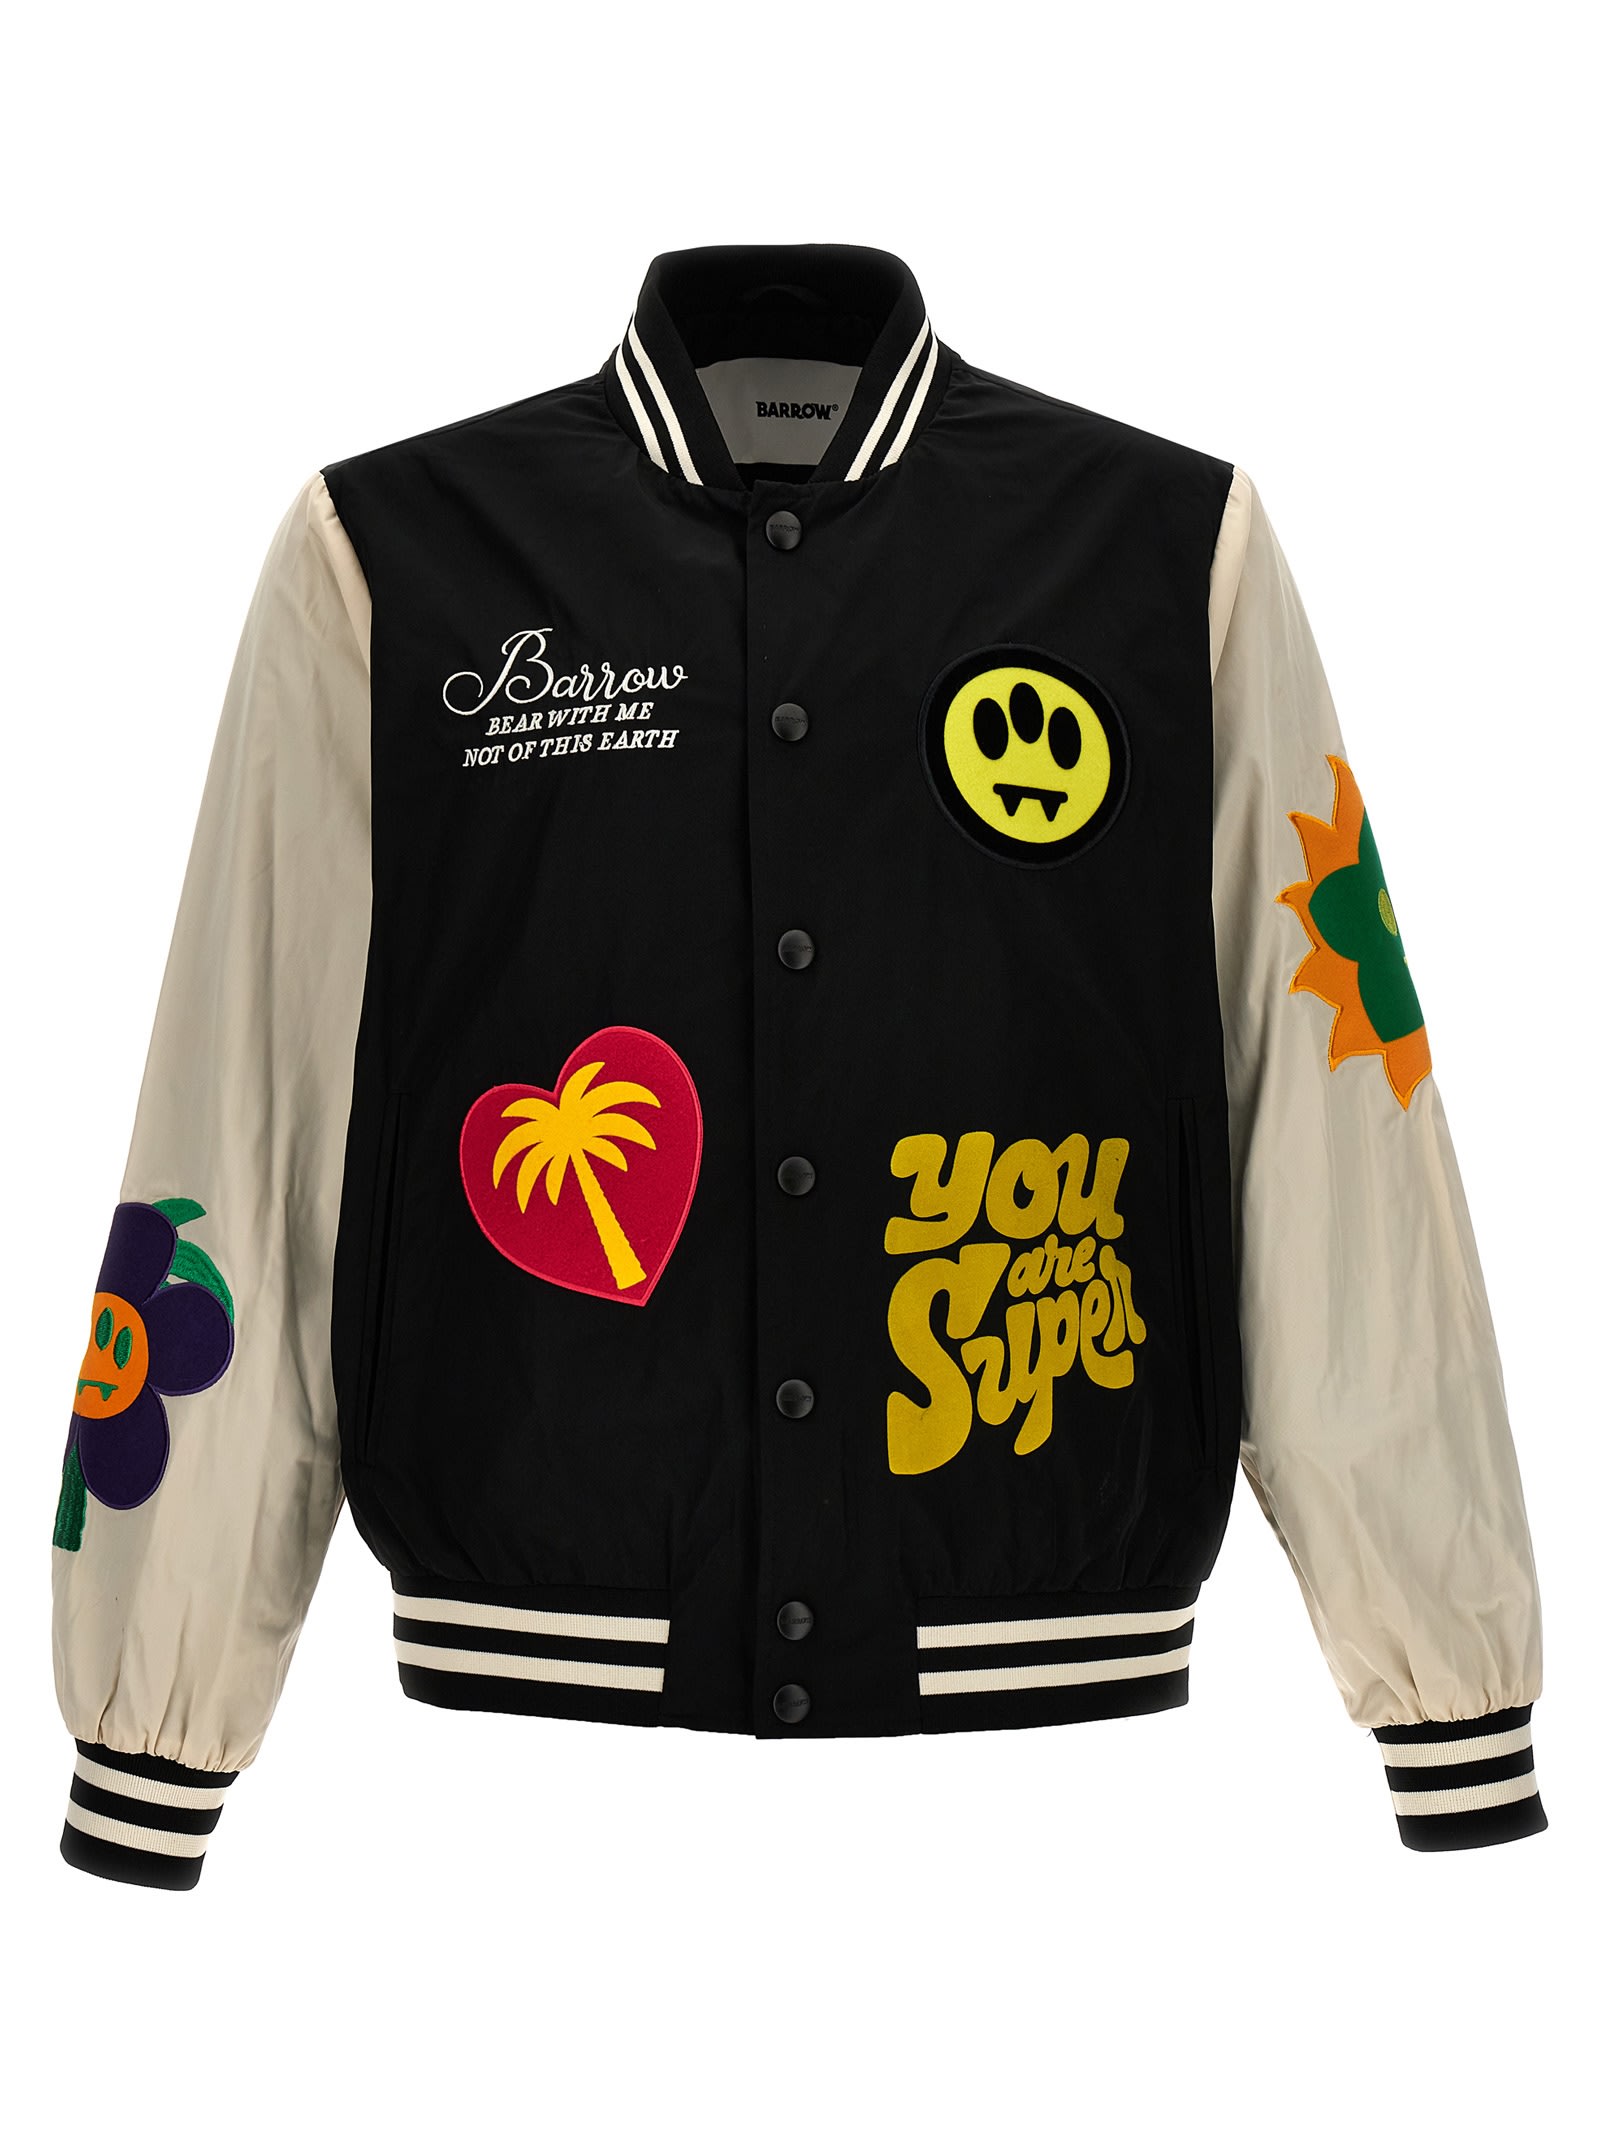 Embroidery Bomber Jacket And Patches